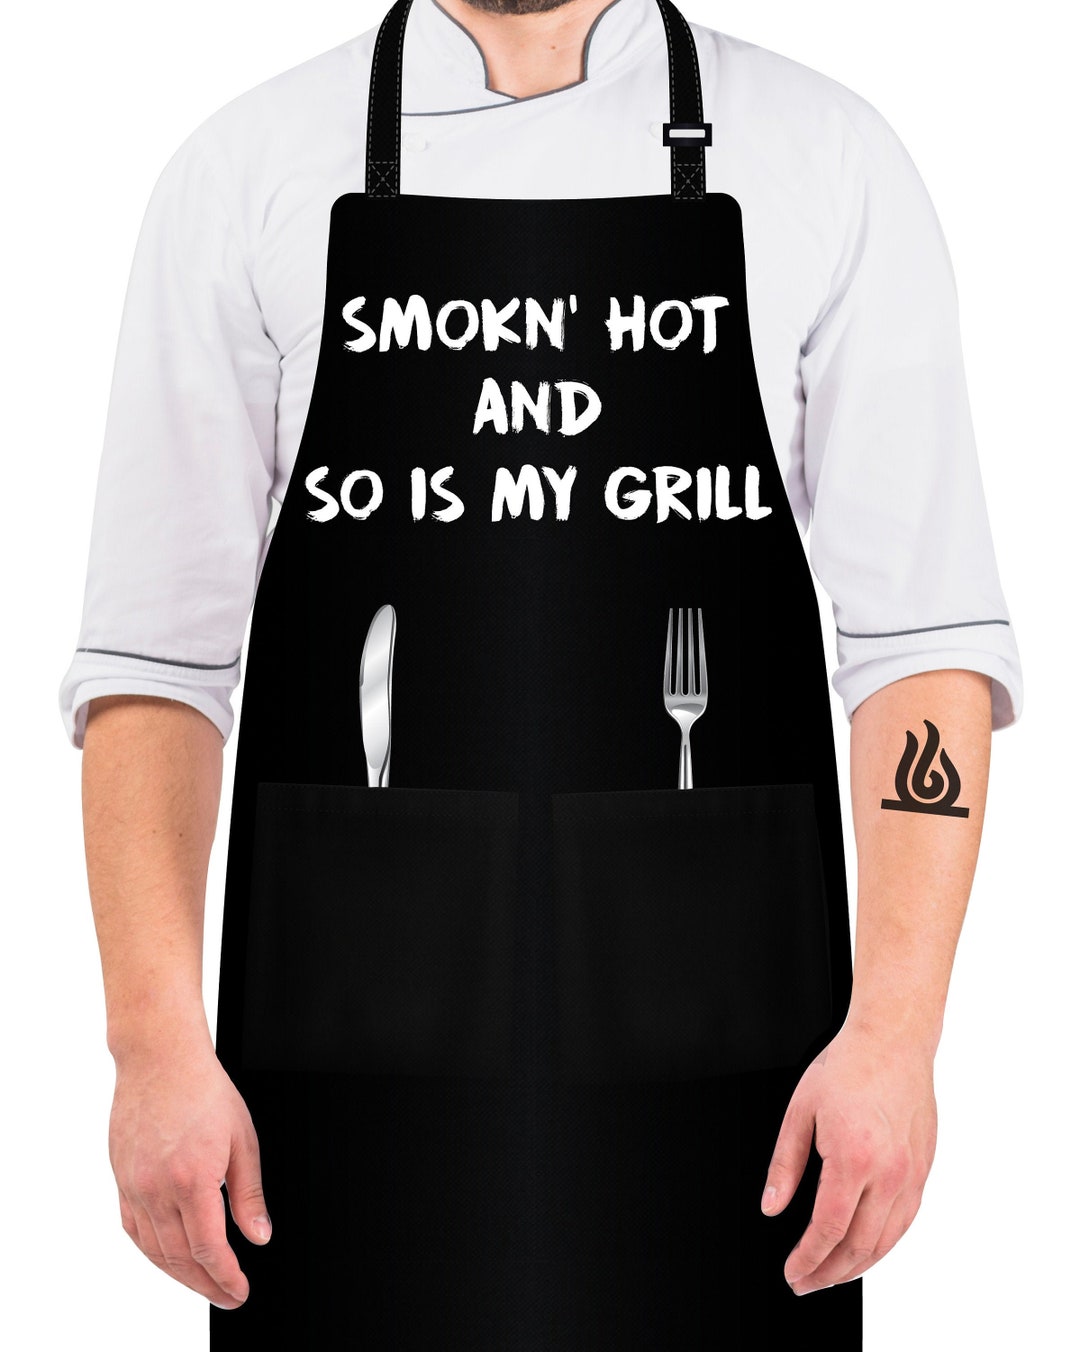 Bbq Funny Grilling Aprons Kitchen Apron Smoking Hot And So Is My Grill Humorous Mothers Day 